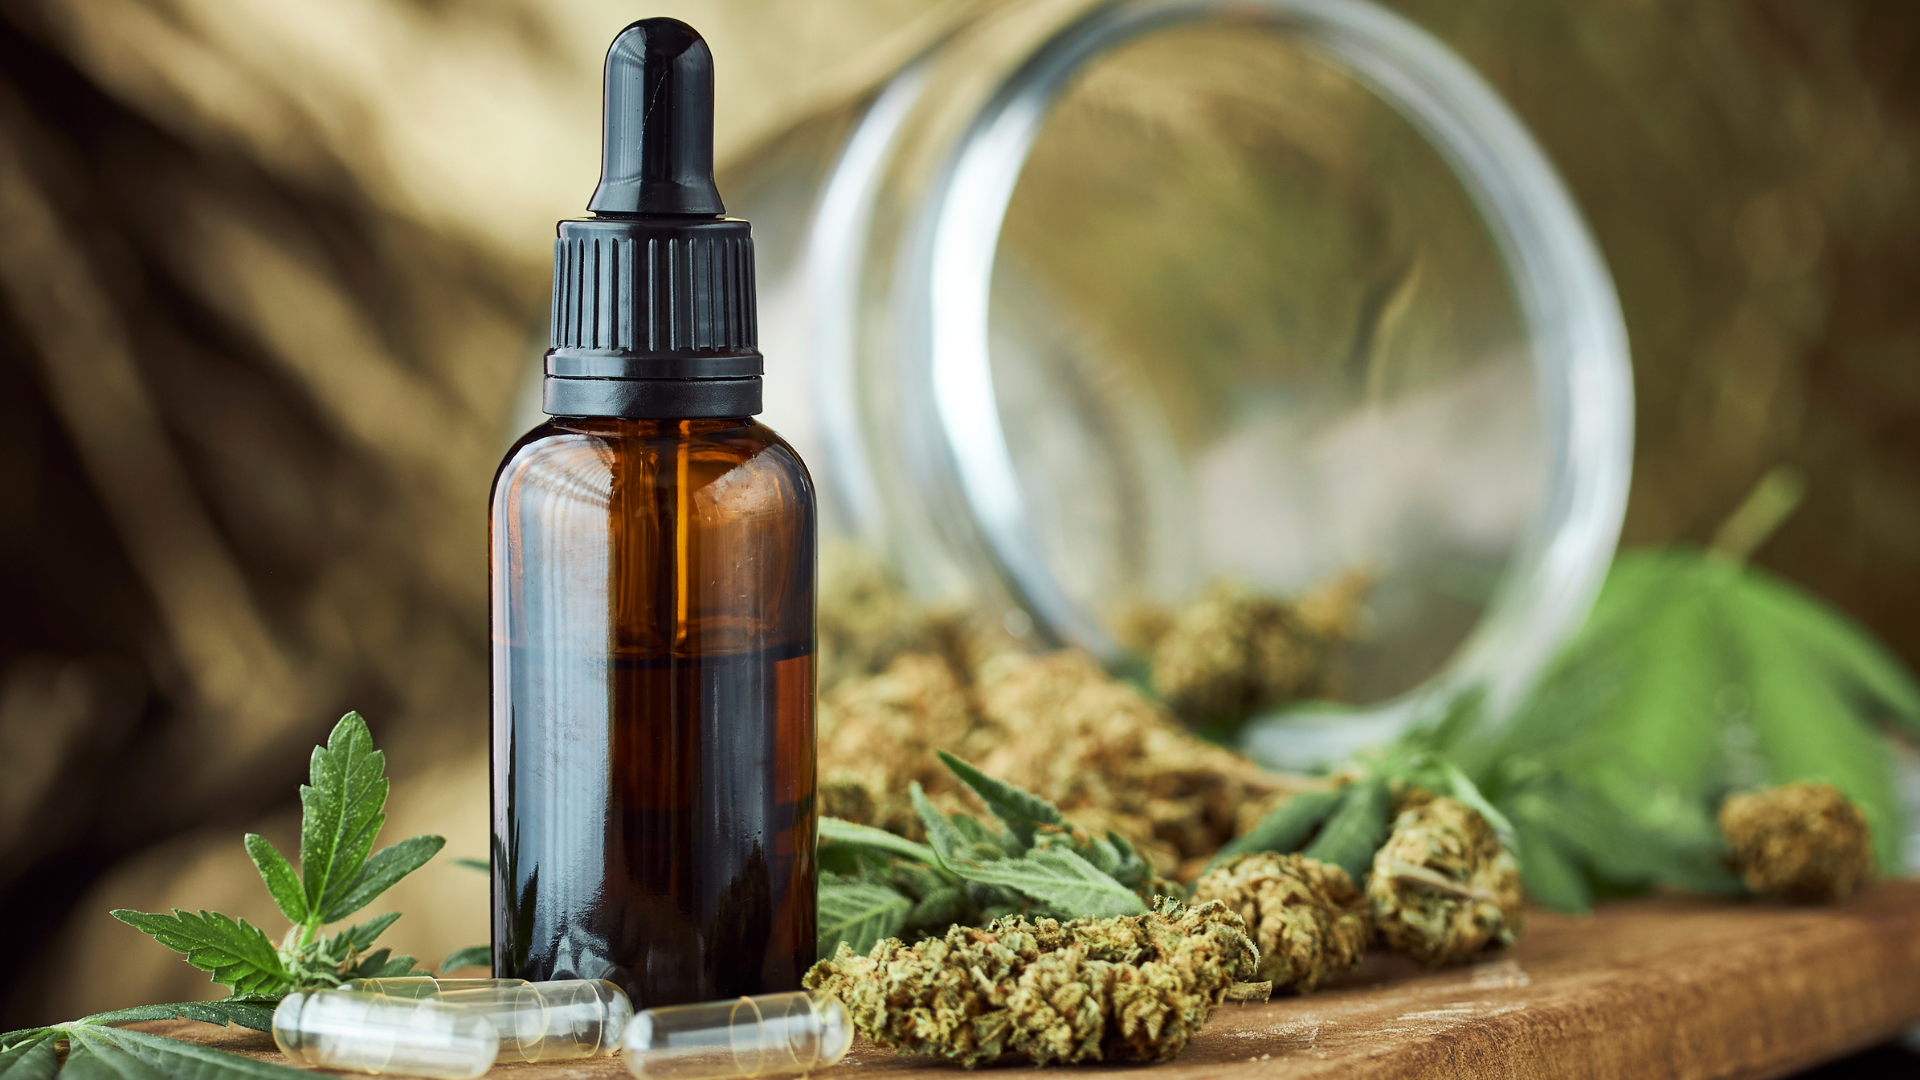 The Ultimate CBD Guide To Use And Not to Use